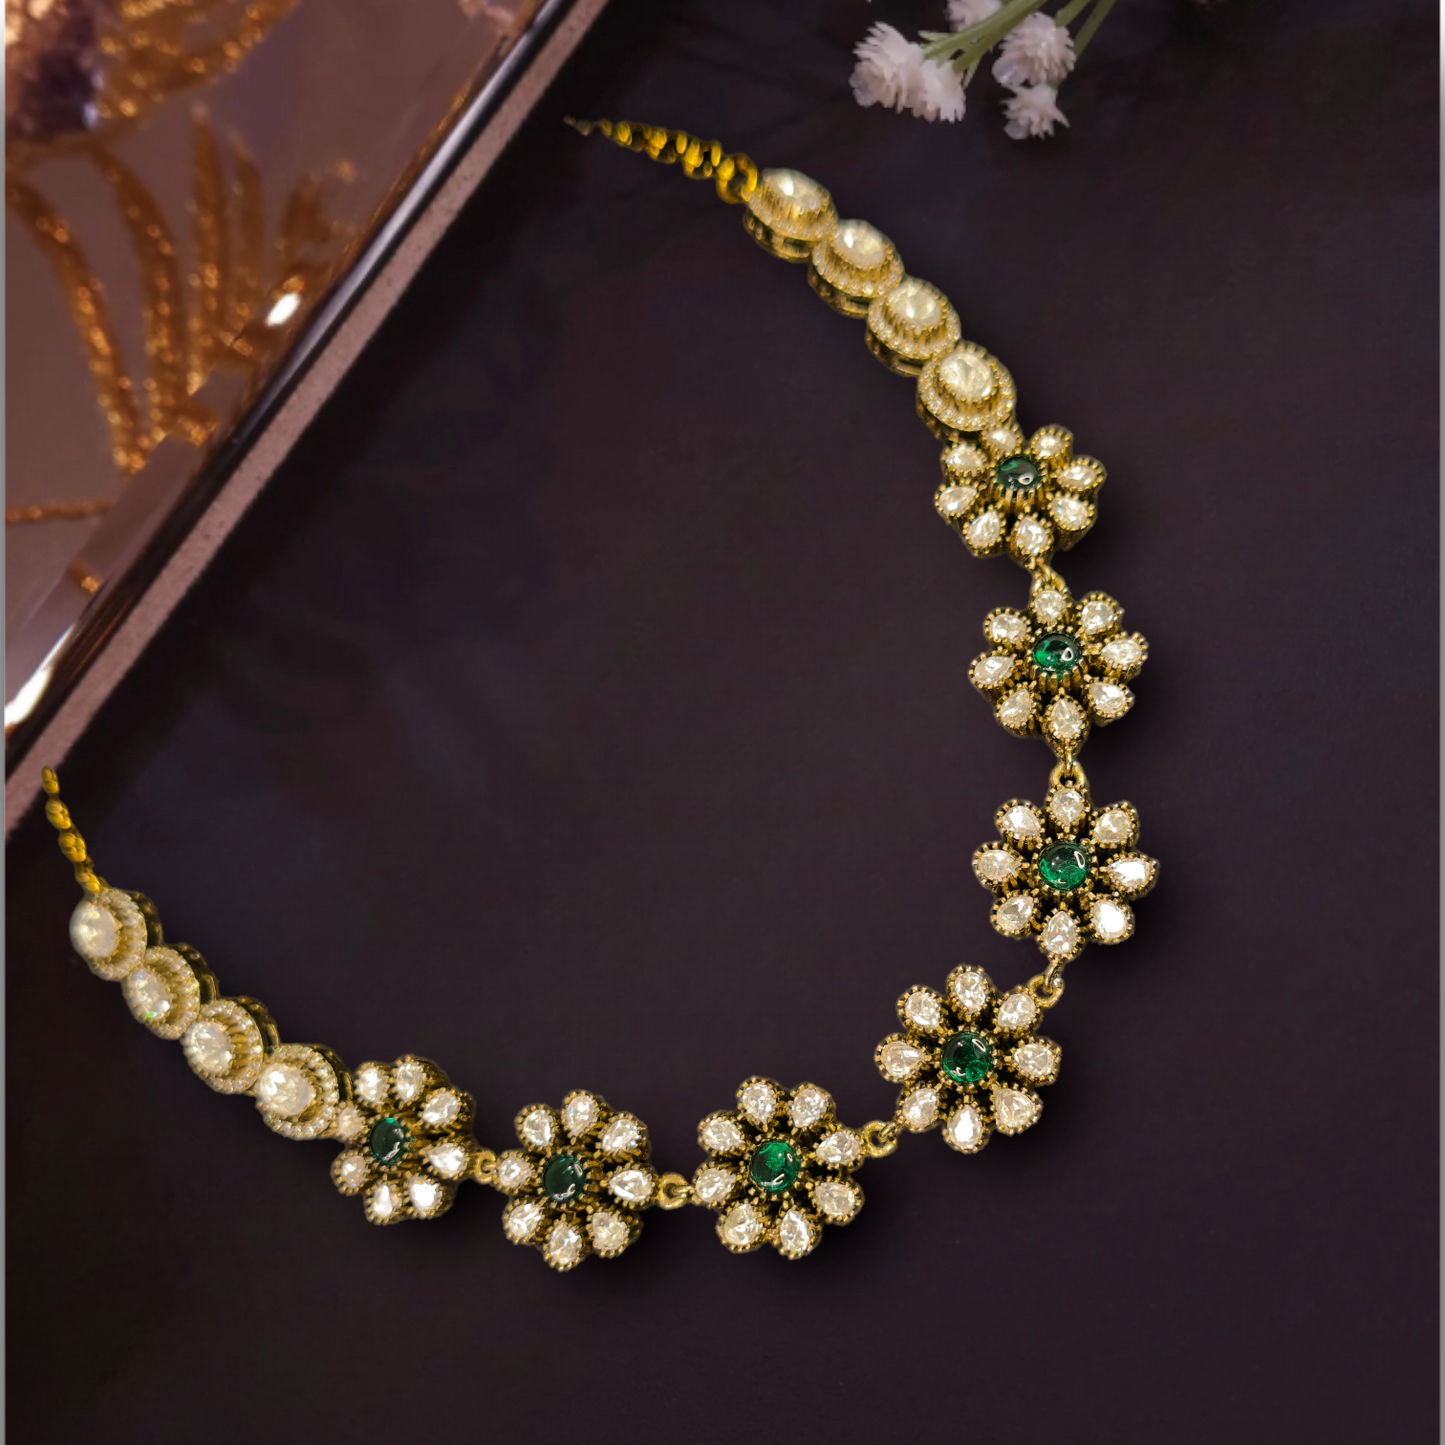 Floral Victorian Necklace Set with zircon,and moissanite polki stones ,including matching earrings. This Victorian Jewellery is available in a Green colour variant. 